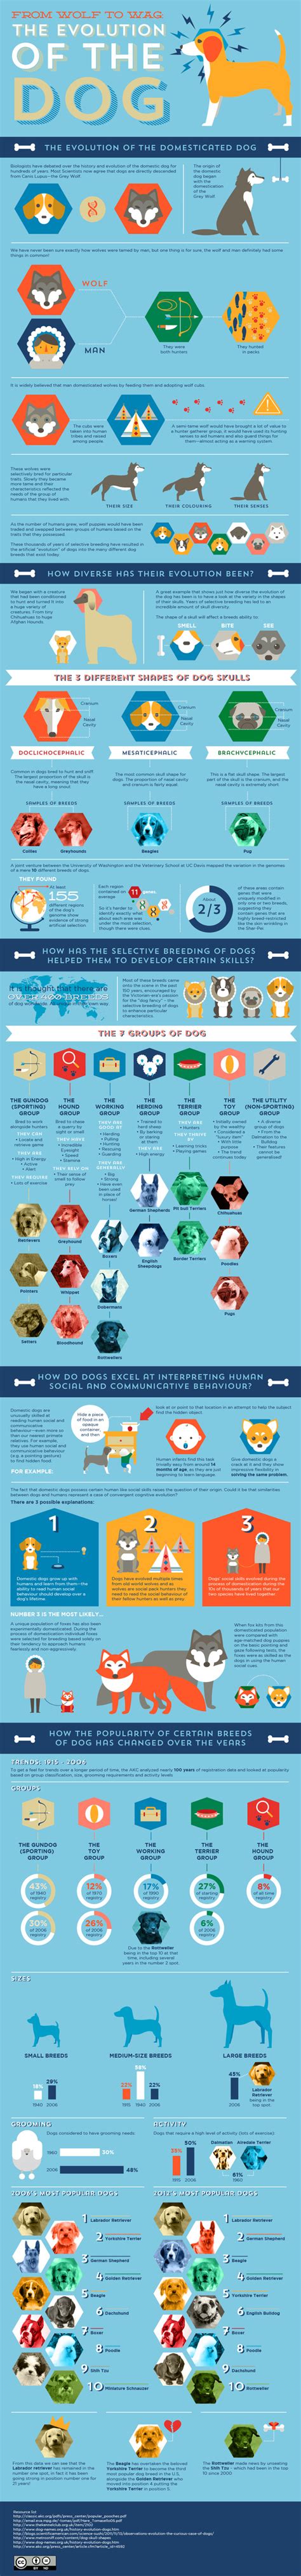 The Evolution Of The Dog Infographic Blog Infographic Submissions